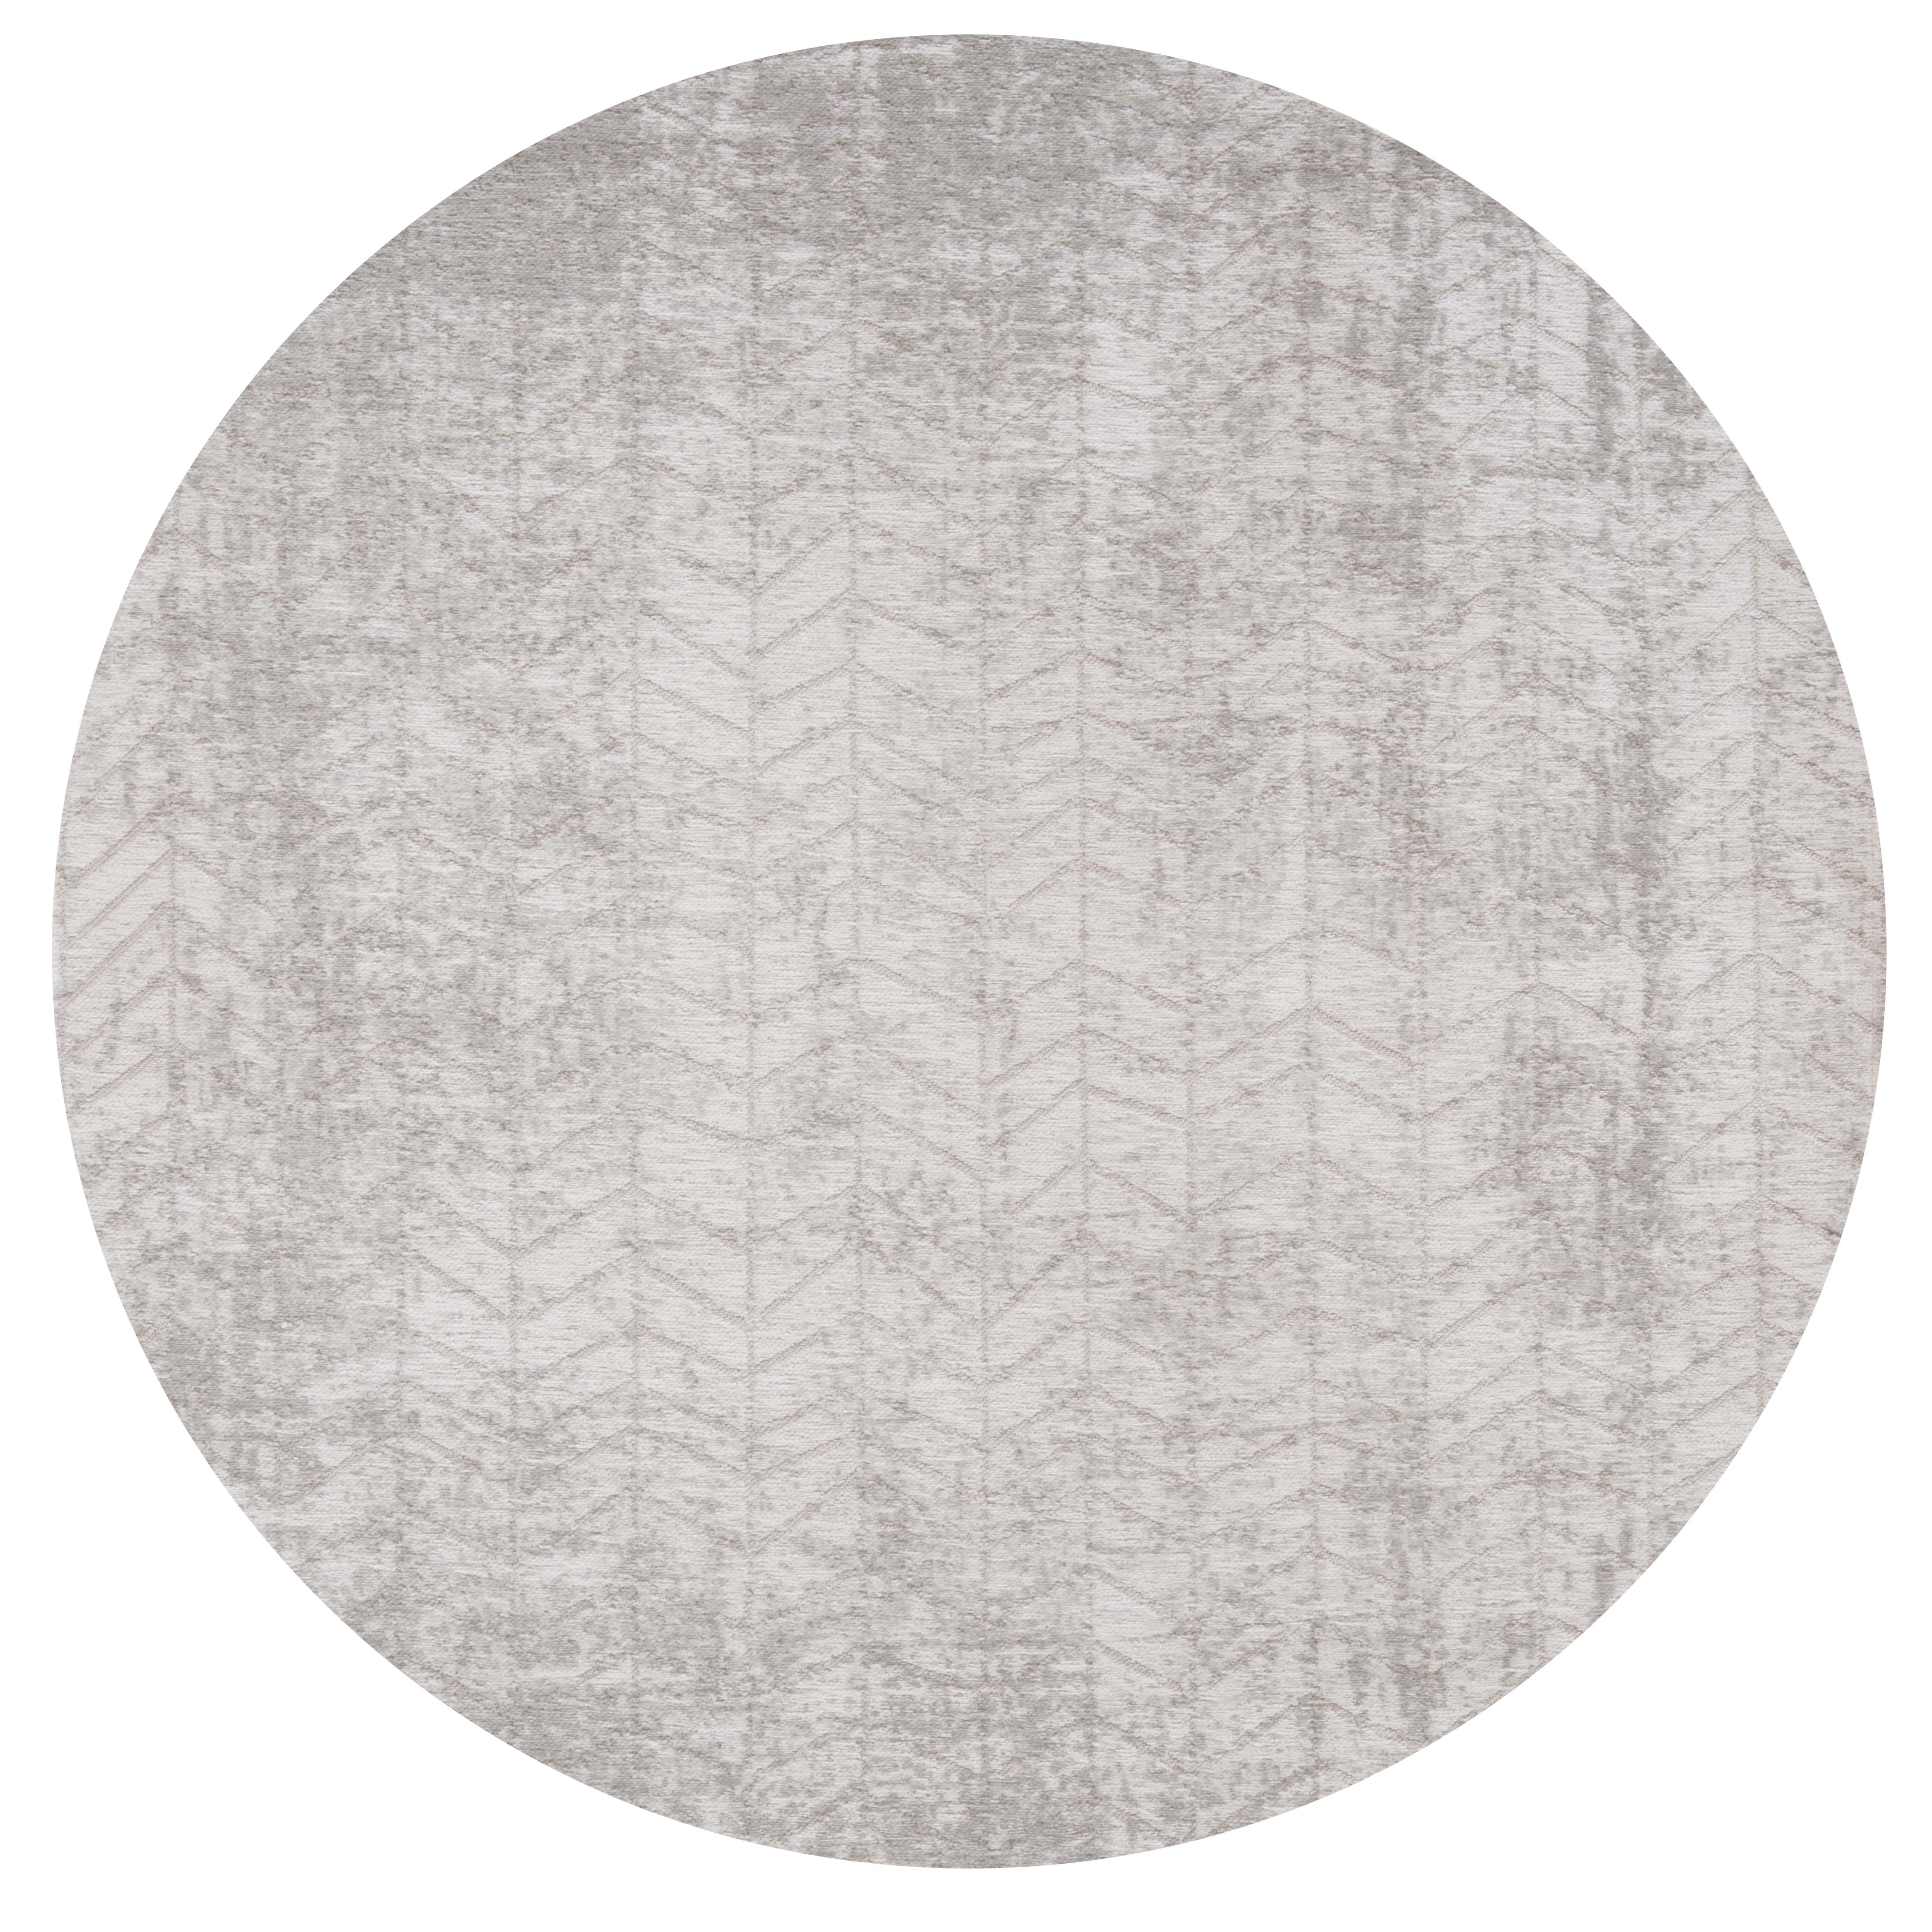 Circle Ivory flatweave rug with faded grey chevron pattern